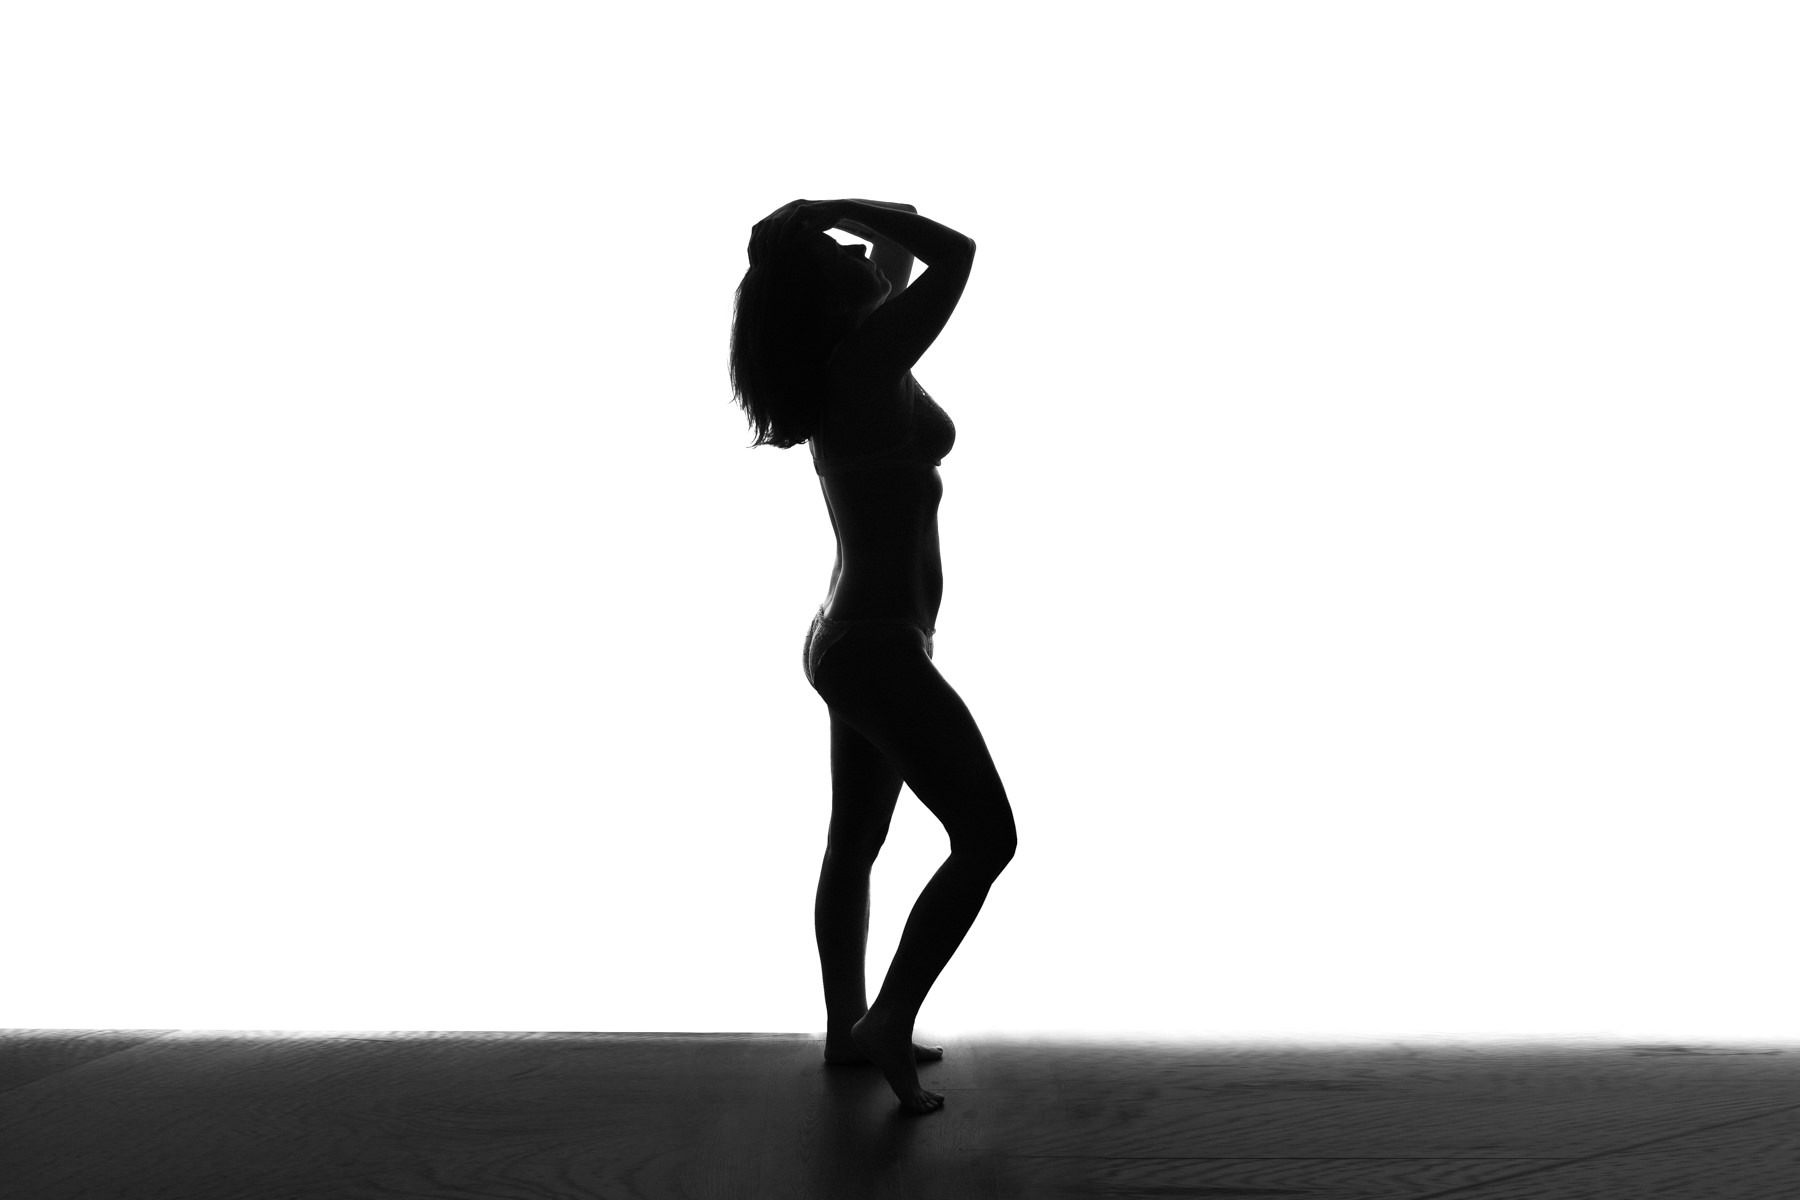 Silhouette of woman in lingerie with one knee bent and arms reaching upwards